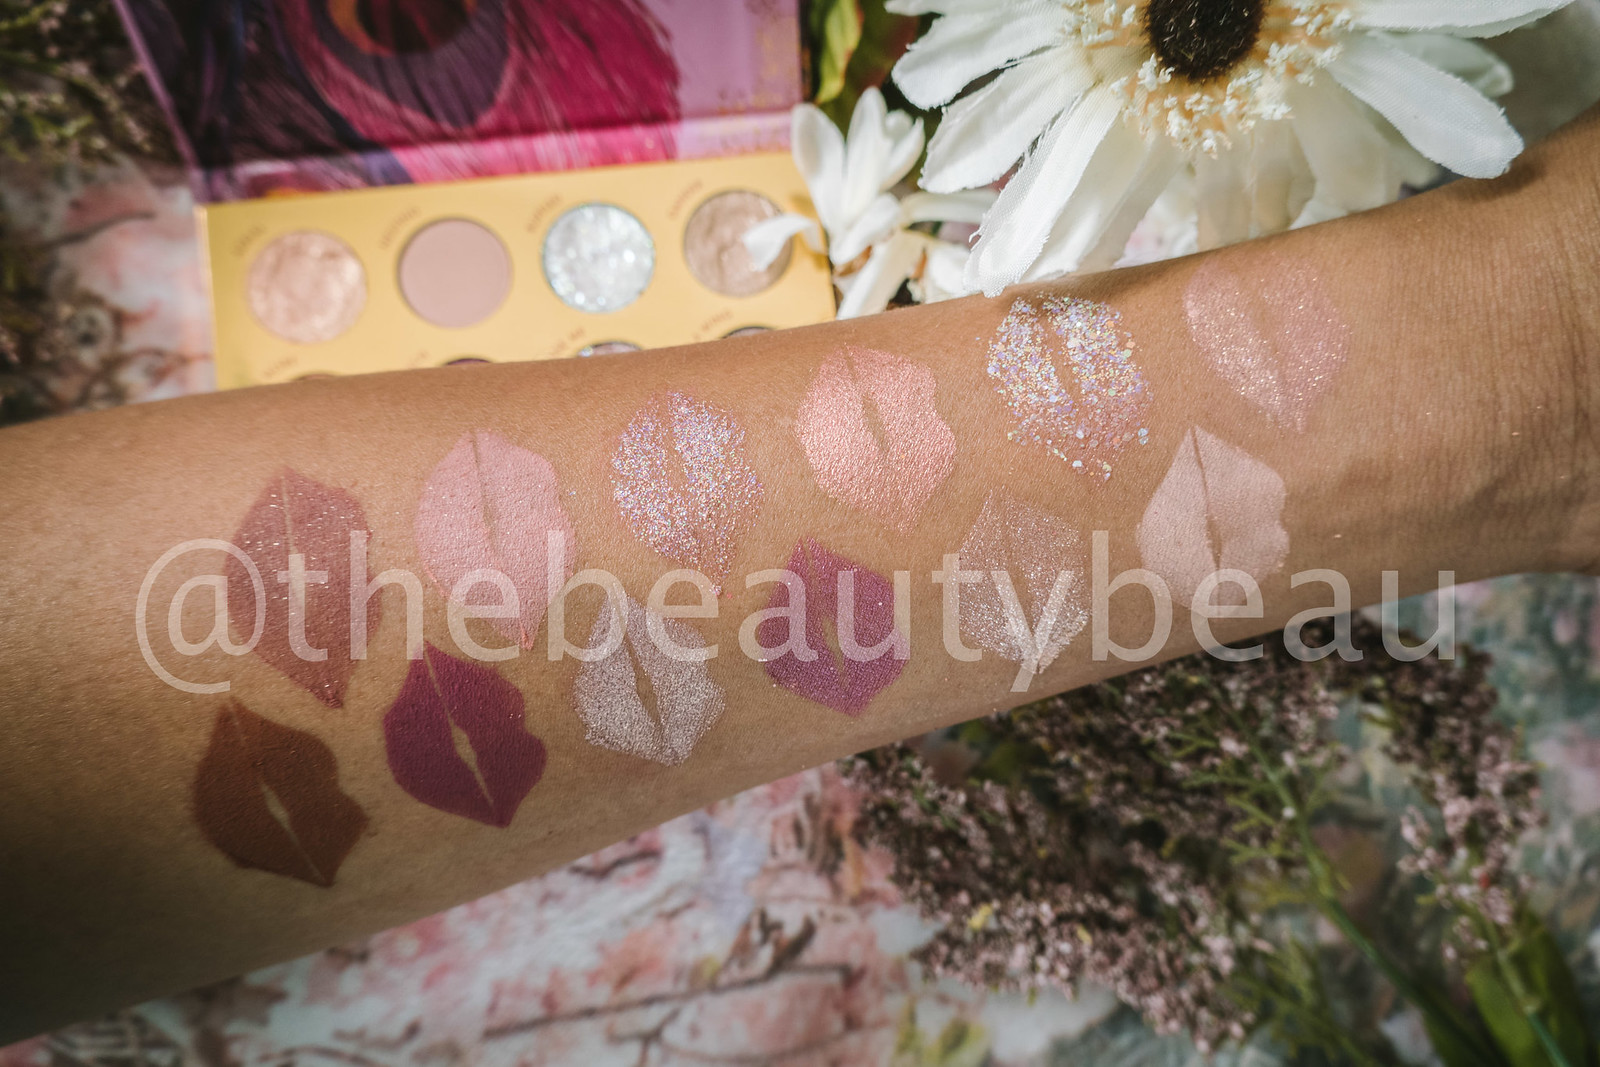 colourpop bye bye birdie palette review with swatches